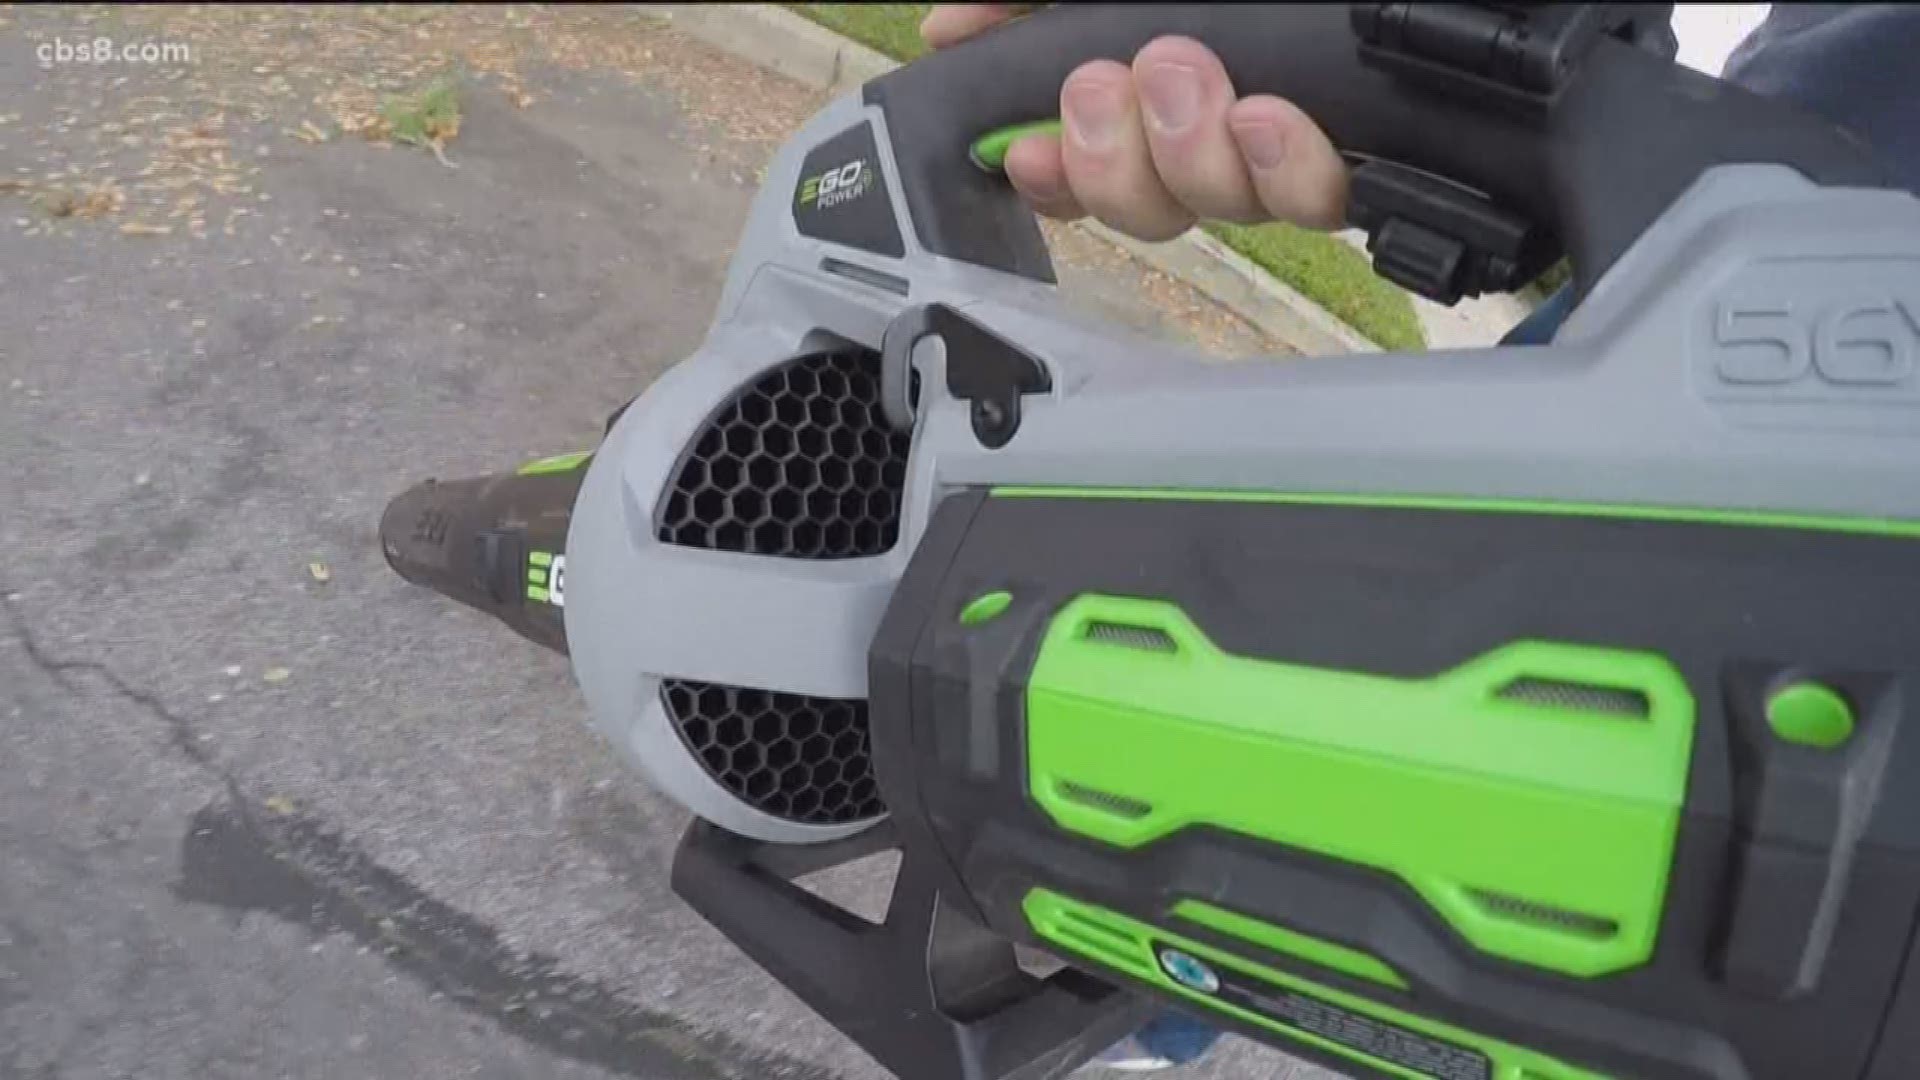 California could ban leaf blowers statewide due to pollution.